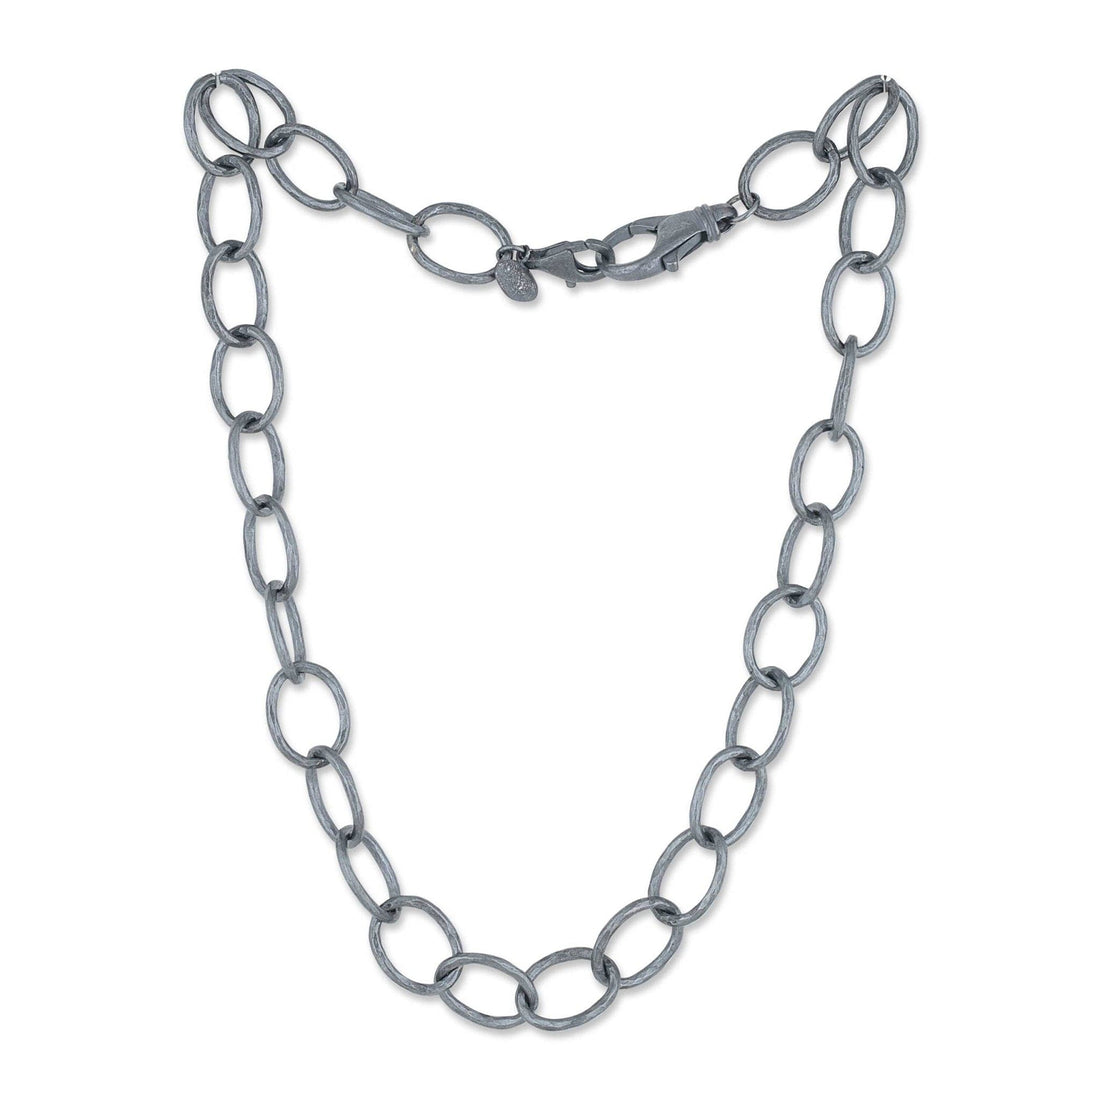 Oxidized Sterling Silver Oval Links Chain Necklace by Lika Behar